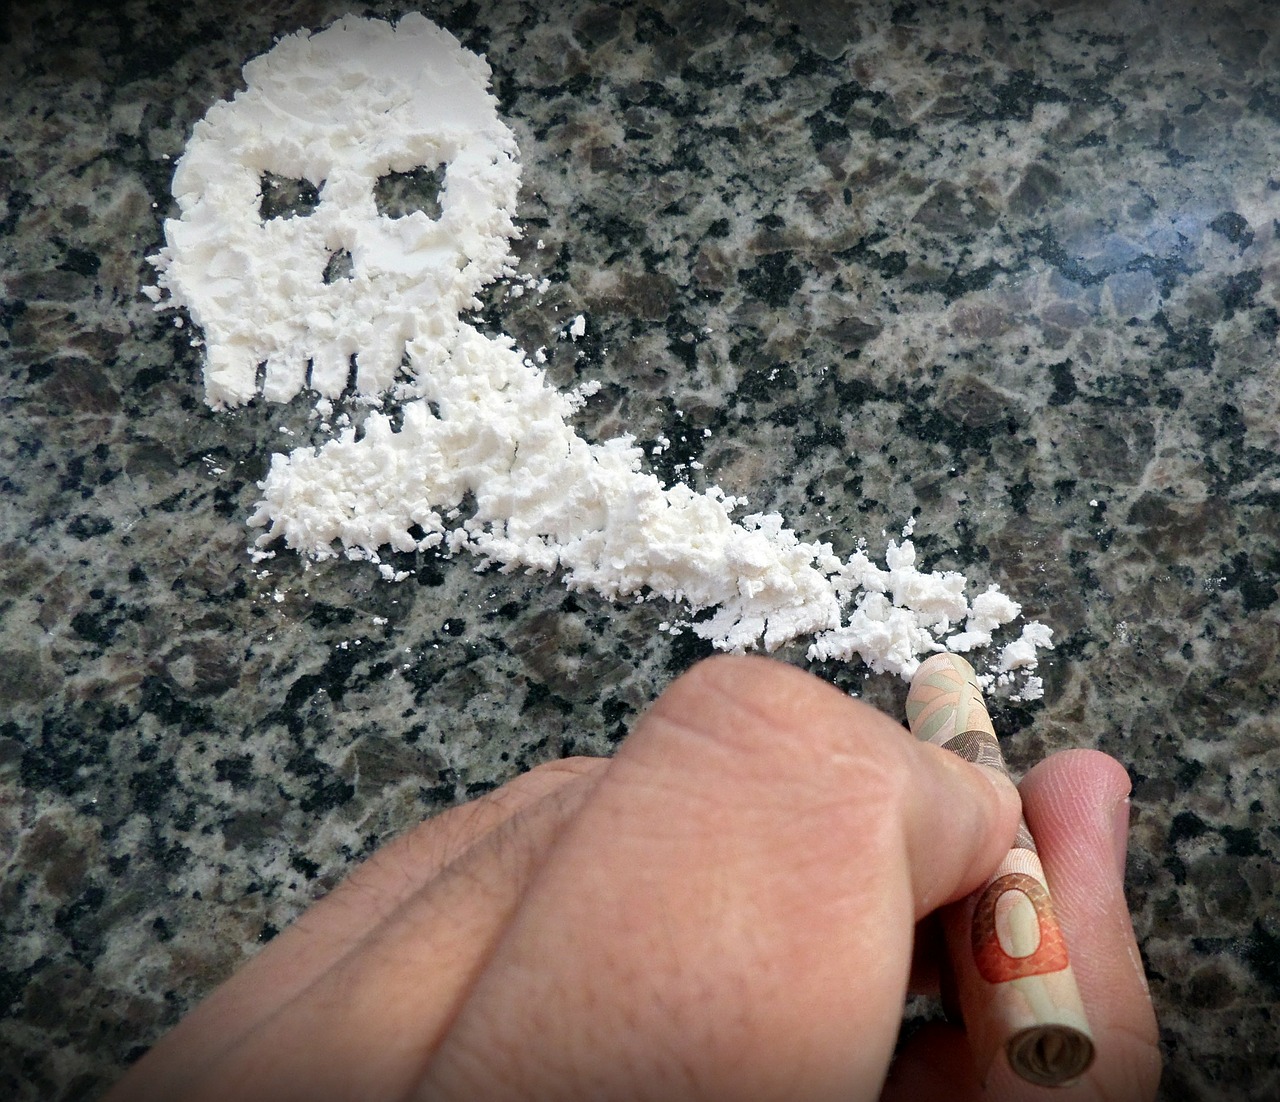 Cocaine Addiction Causes Faster Biological Aging Of The Brain, Study Finds